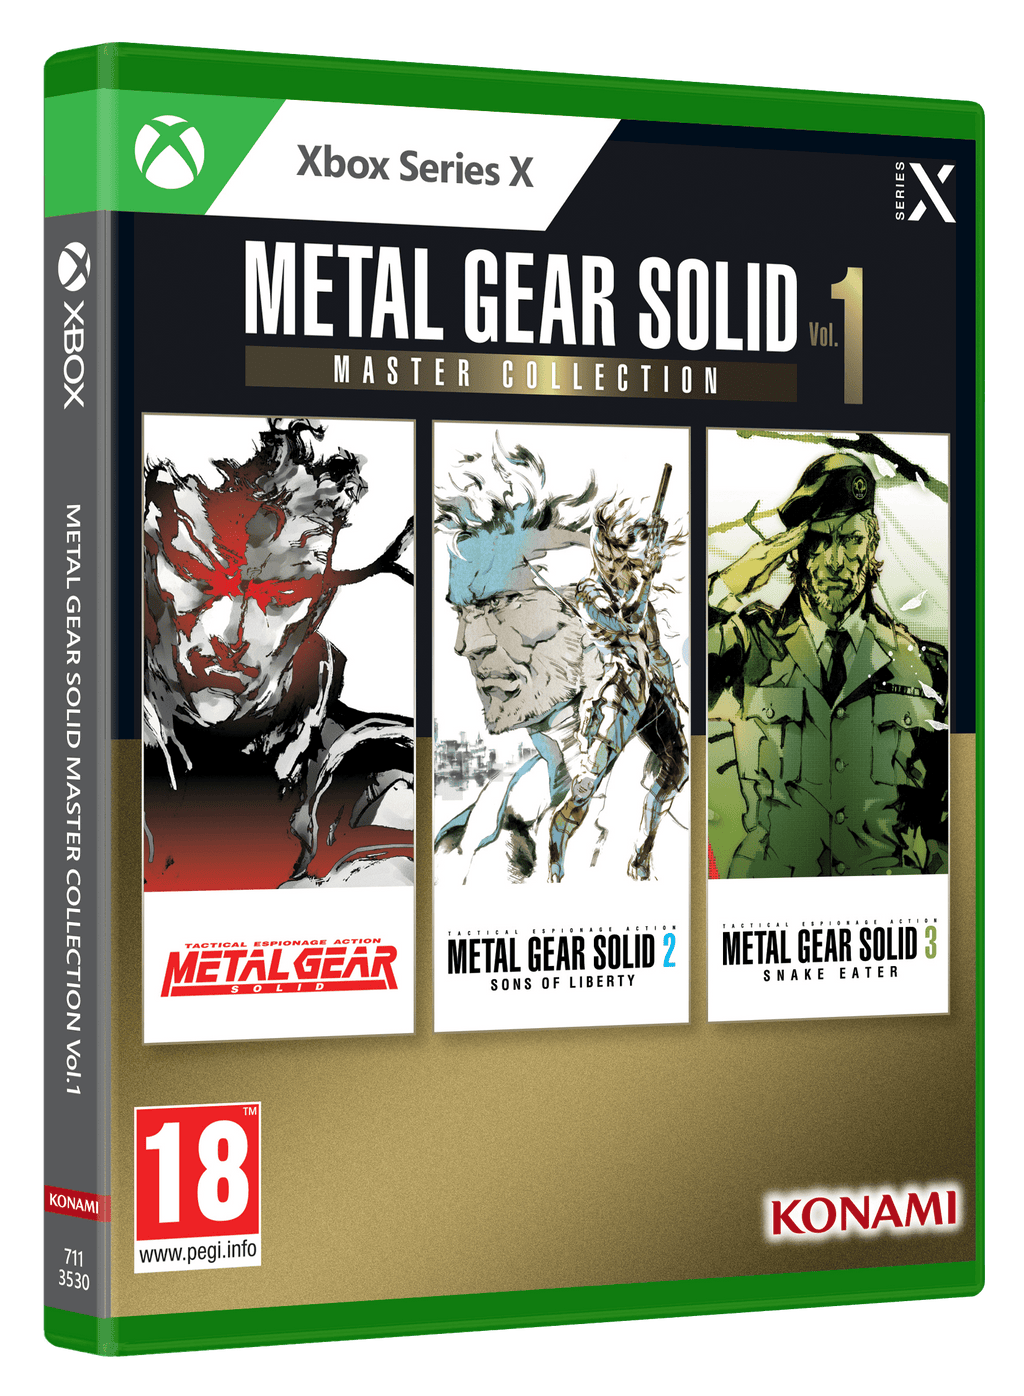 CUSTM REPLACEMENT CASE NO DISC Metal Gear Solid Master Collection vol. 1  XBOX X